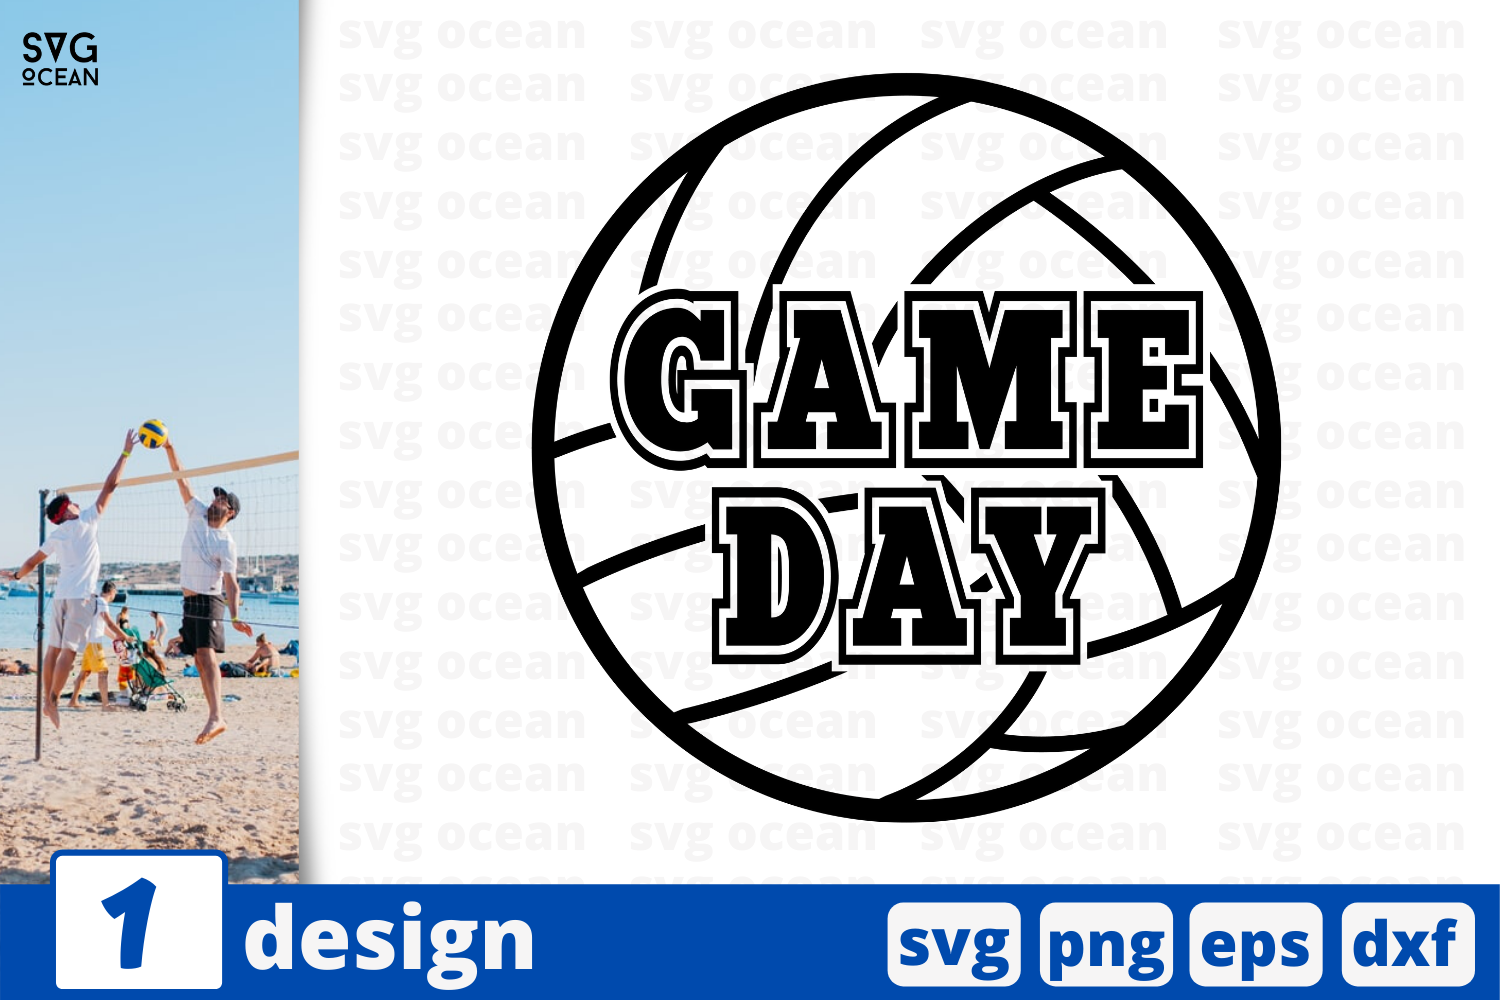 Download 1 Game Day Volleyball Quote Cricut Svg By Svgocean Thehungryjpeg Com